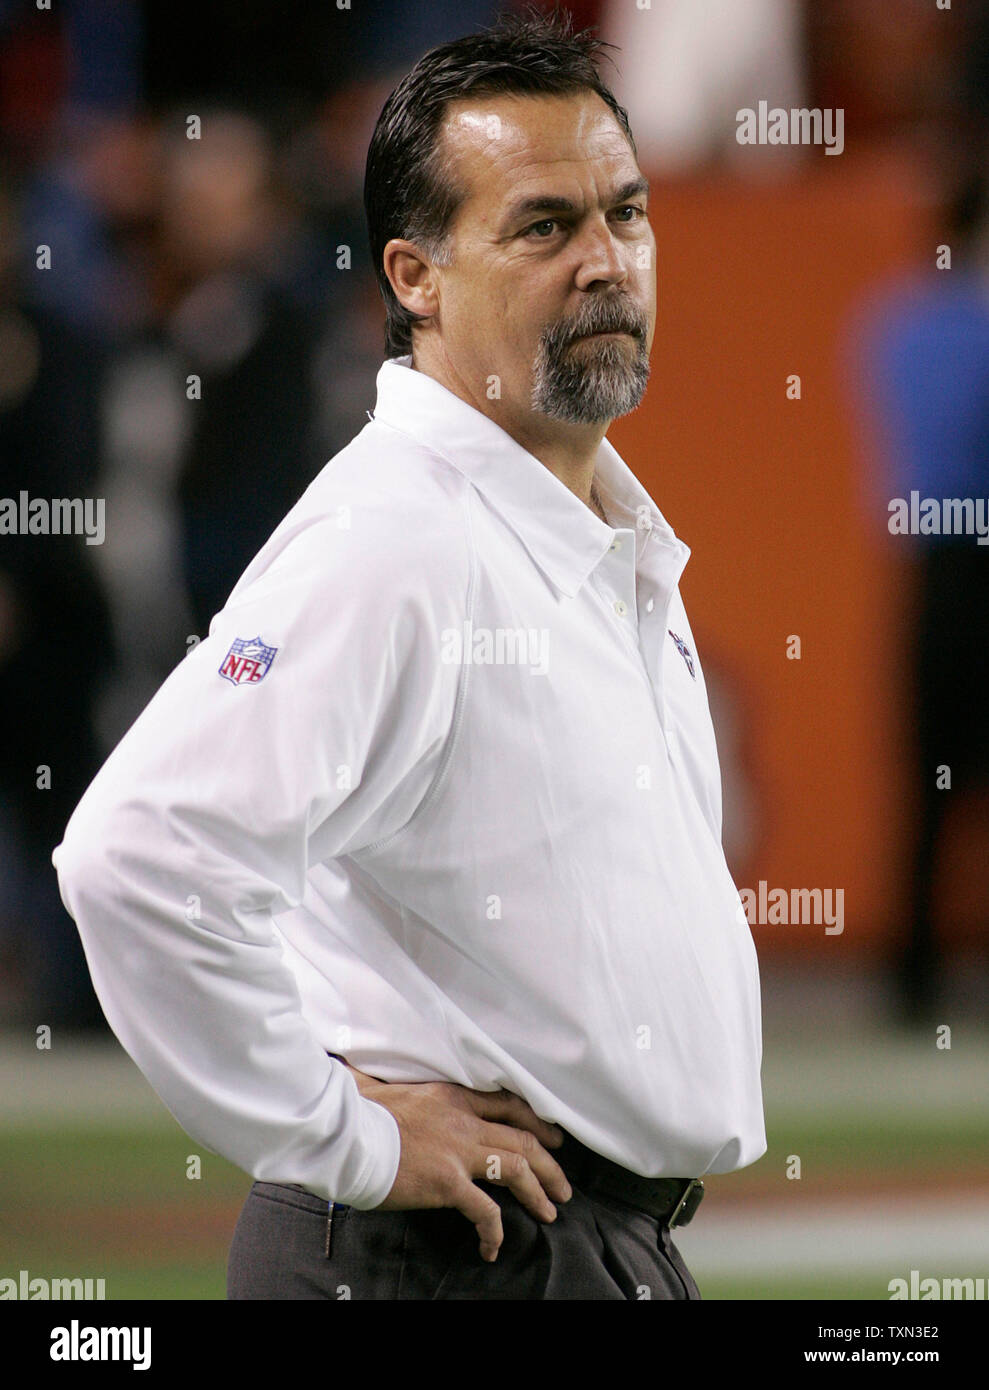 Tennessee Titans head coach Jeff Fisher waits for pre-game drills to begin at Invesco Field at Mile High in Denver on November 19, 2007.  (UPI Photo/Gary C. Caskey) Stock Photo